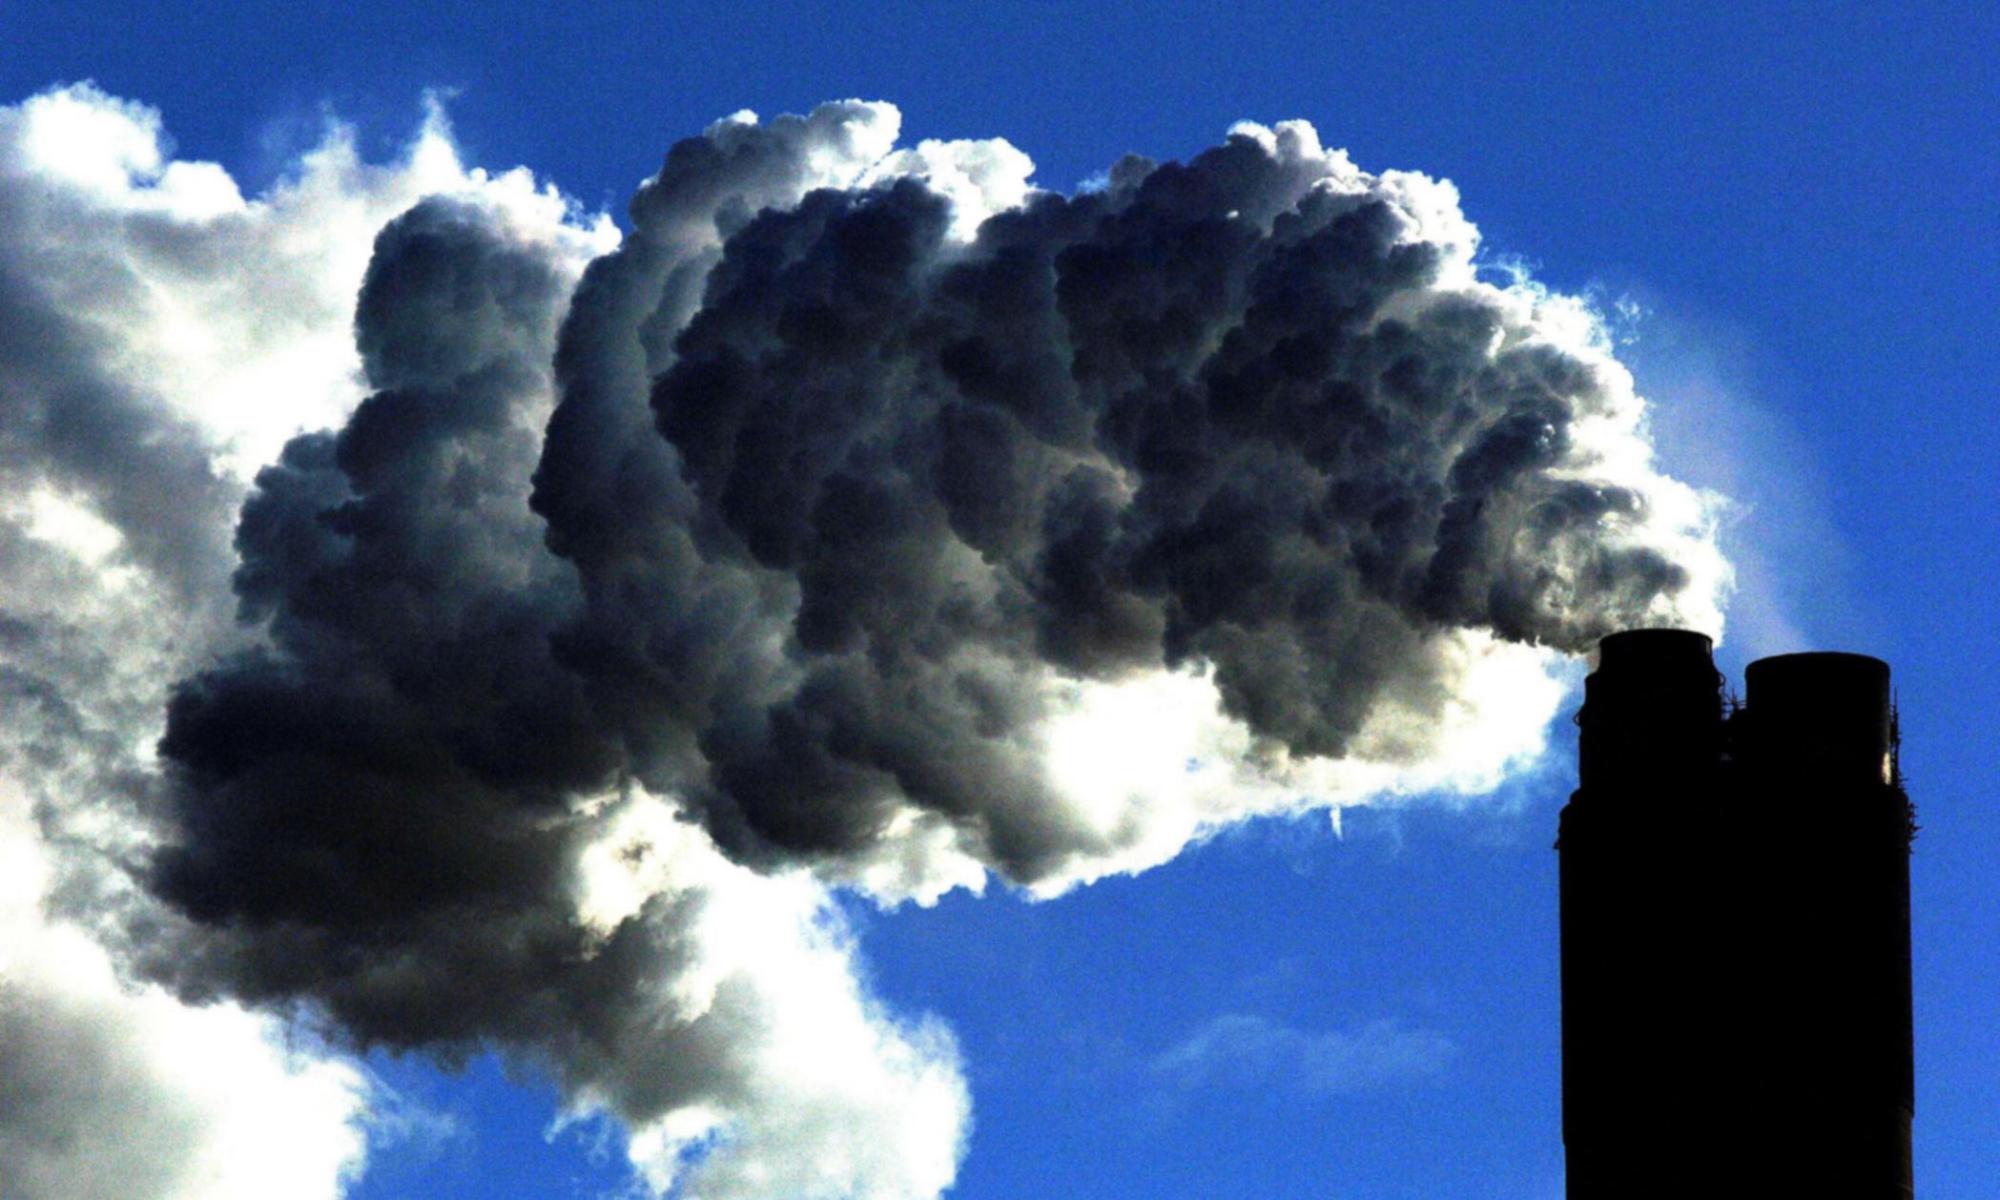 Carbon emissions fall as electricity producers move away from coal